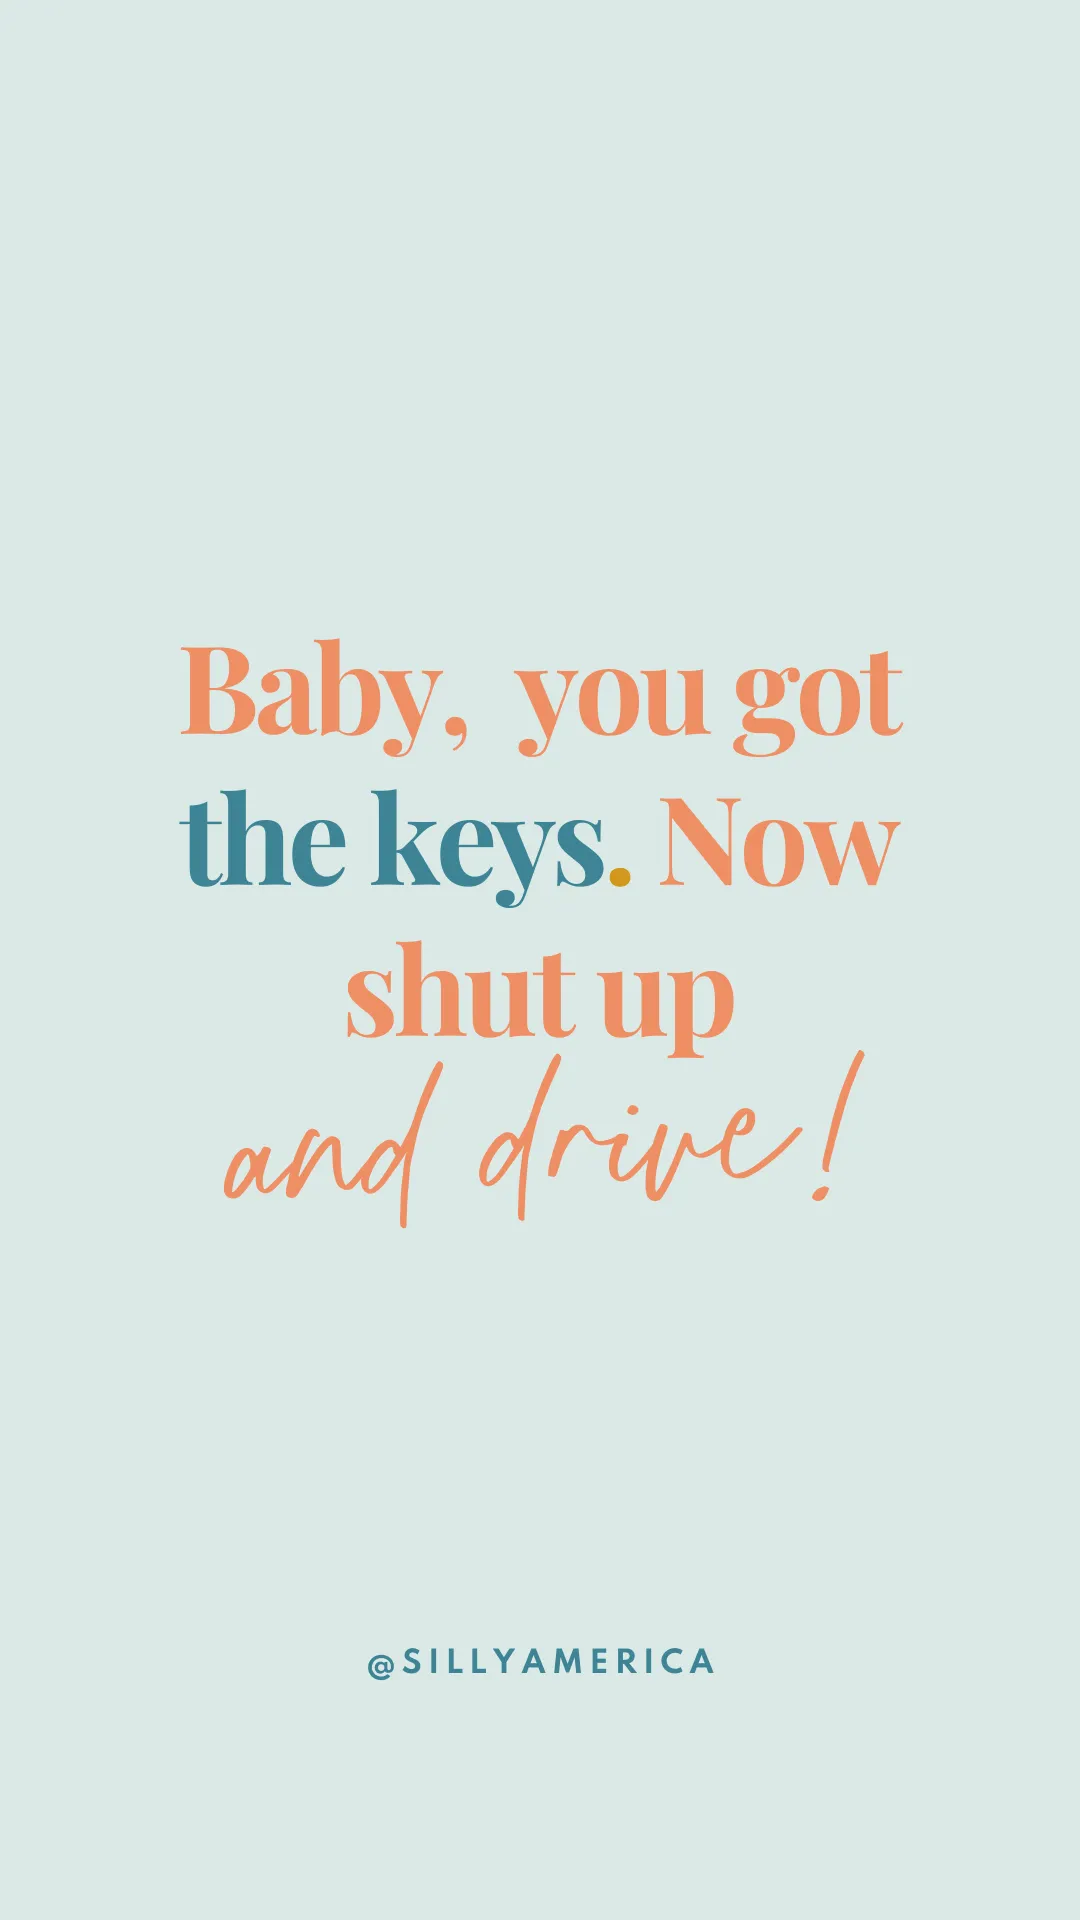 Baby, you got the keys. Now shut up and drive! - Road Trip Captions for Instagram